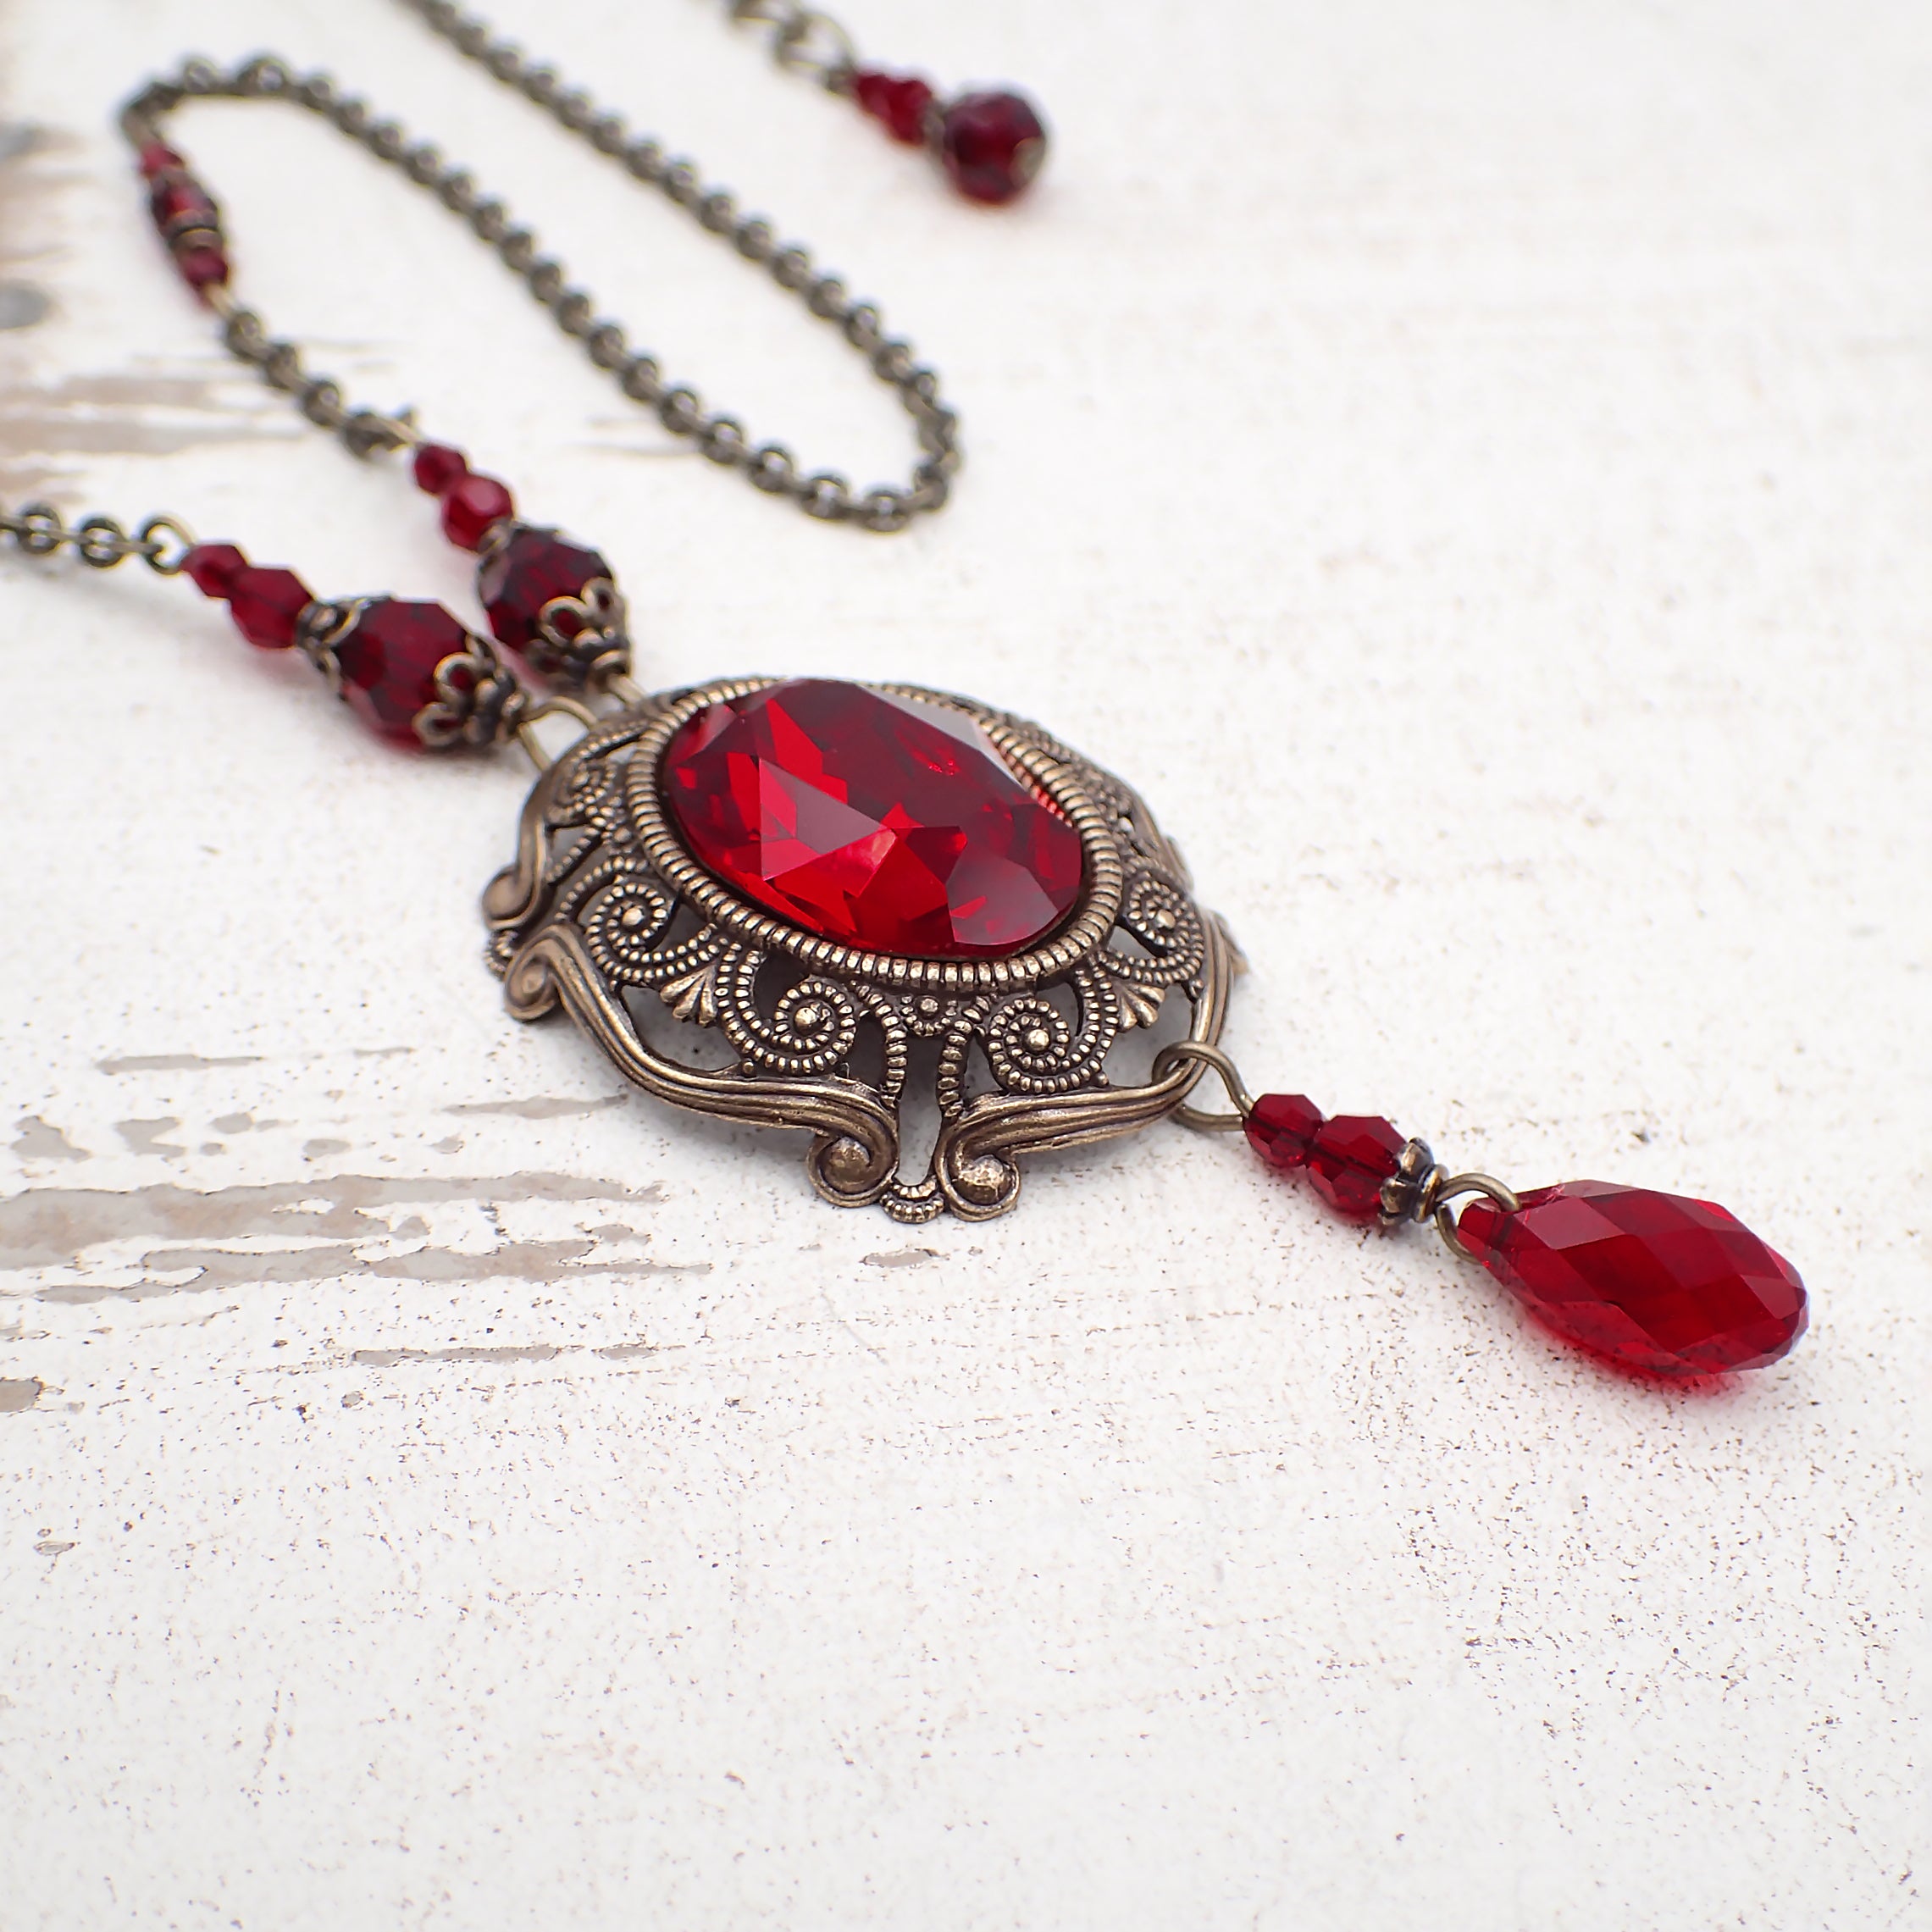 skandale jogger Hong Kong Dark Red and Bronze Crystal Victorian Style Necklace | Ardent Hearts |  Ardent Hearts Designs